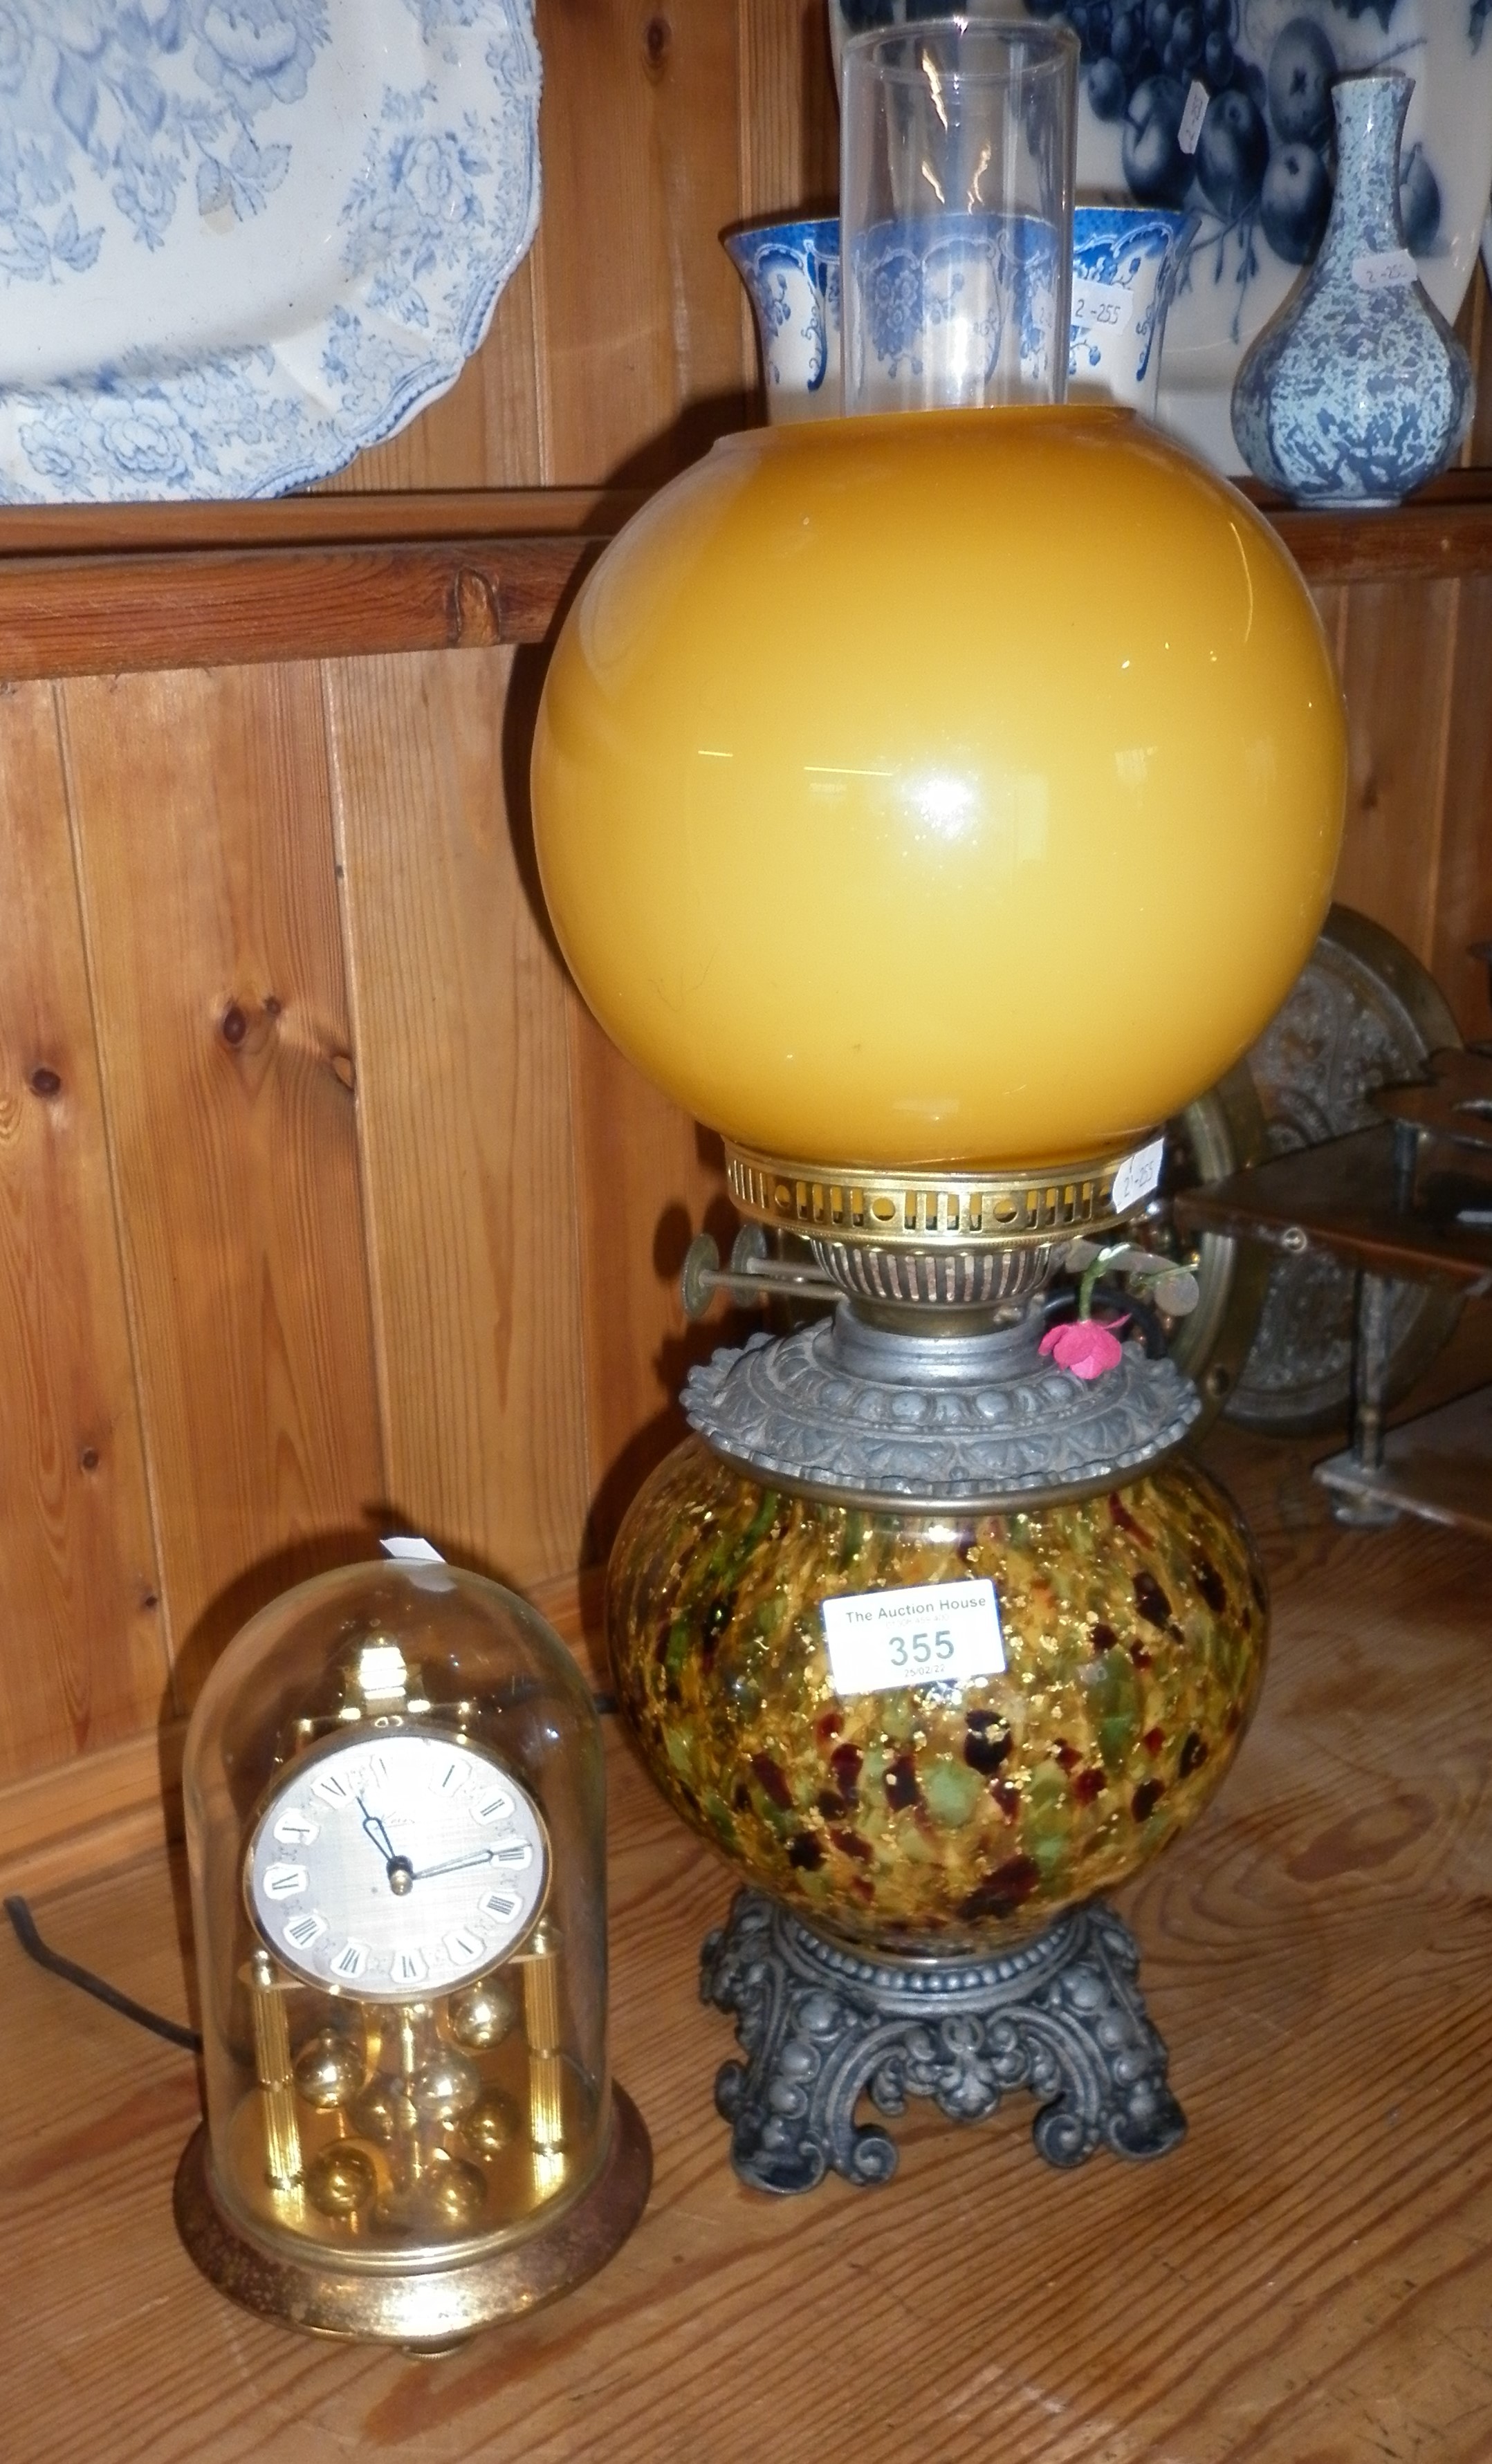 Oil lamp with speckled lustrous reservoir (converted), and a clock under a dome by Kern